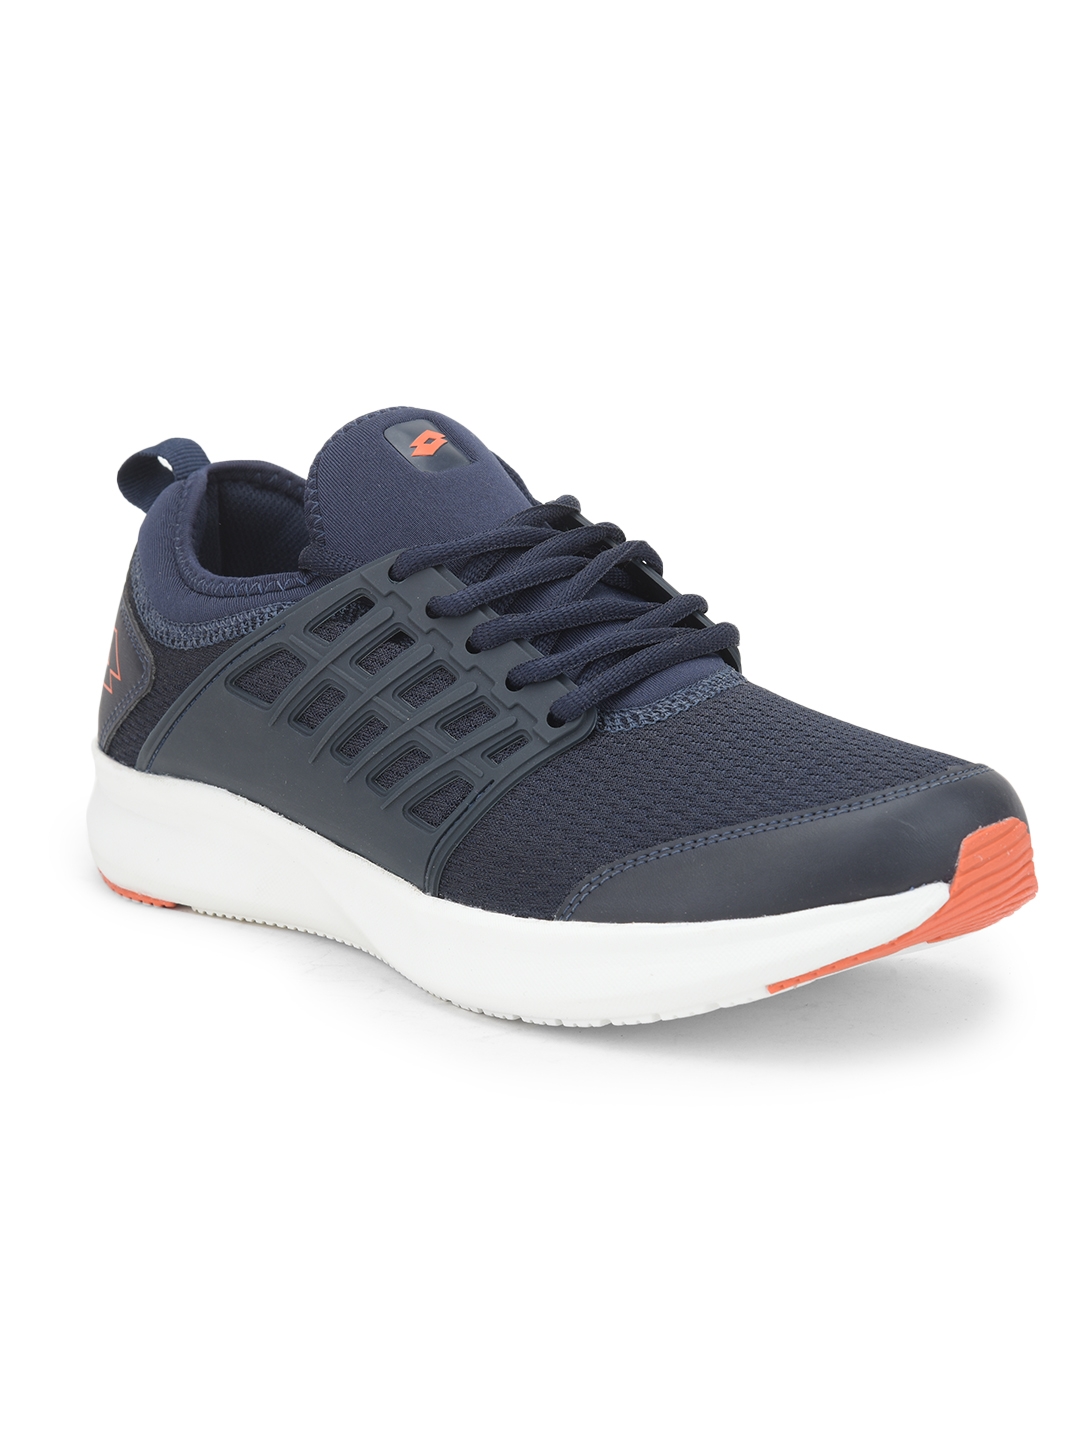 Lotto | LOTTO MEN BREEZE MLG 2.0 BLUE RUNNING SHOES